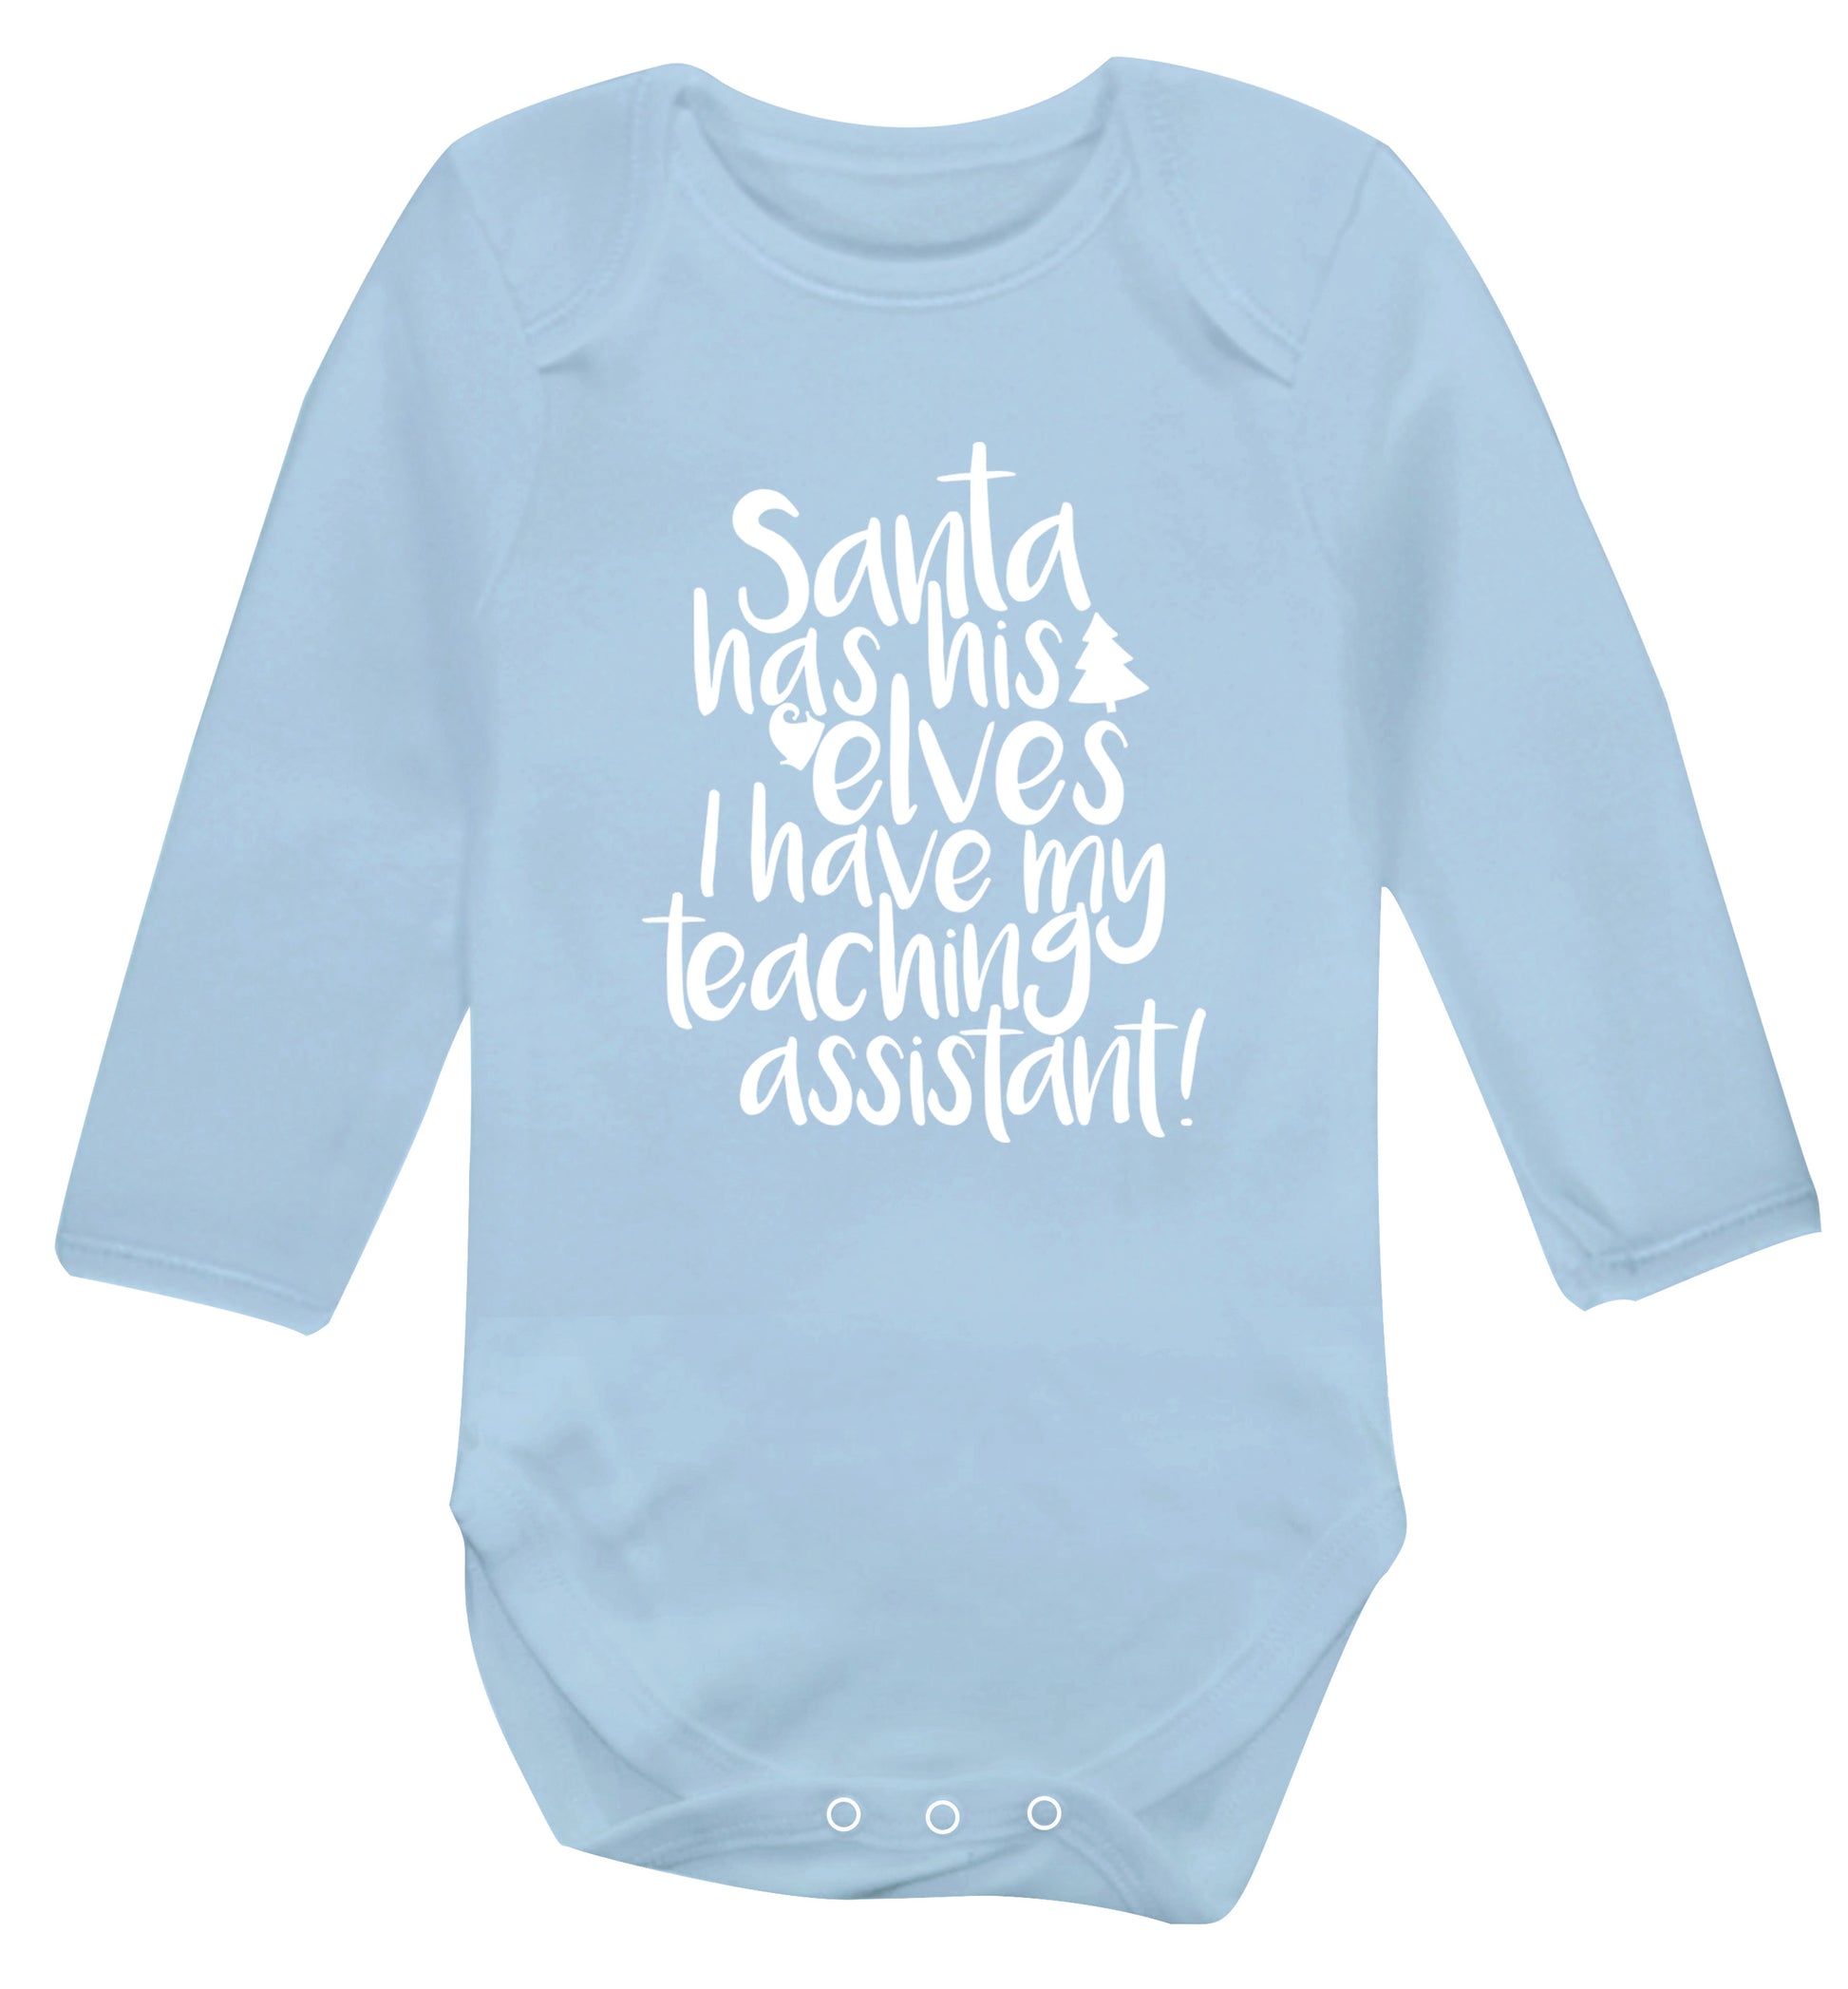 Santa has his elves I have my teaching assistant Baby Vest long sleeved pale blue 6-12 months